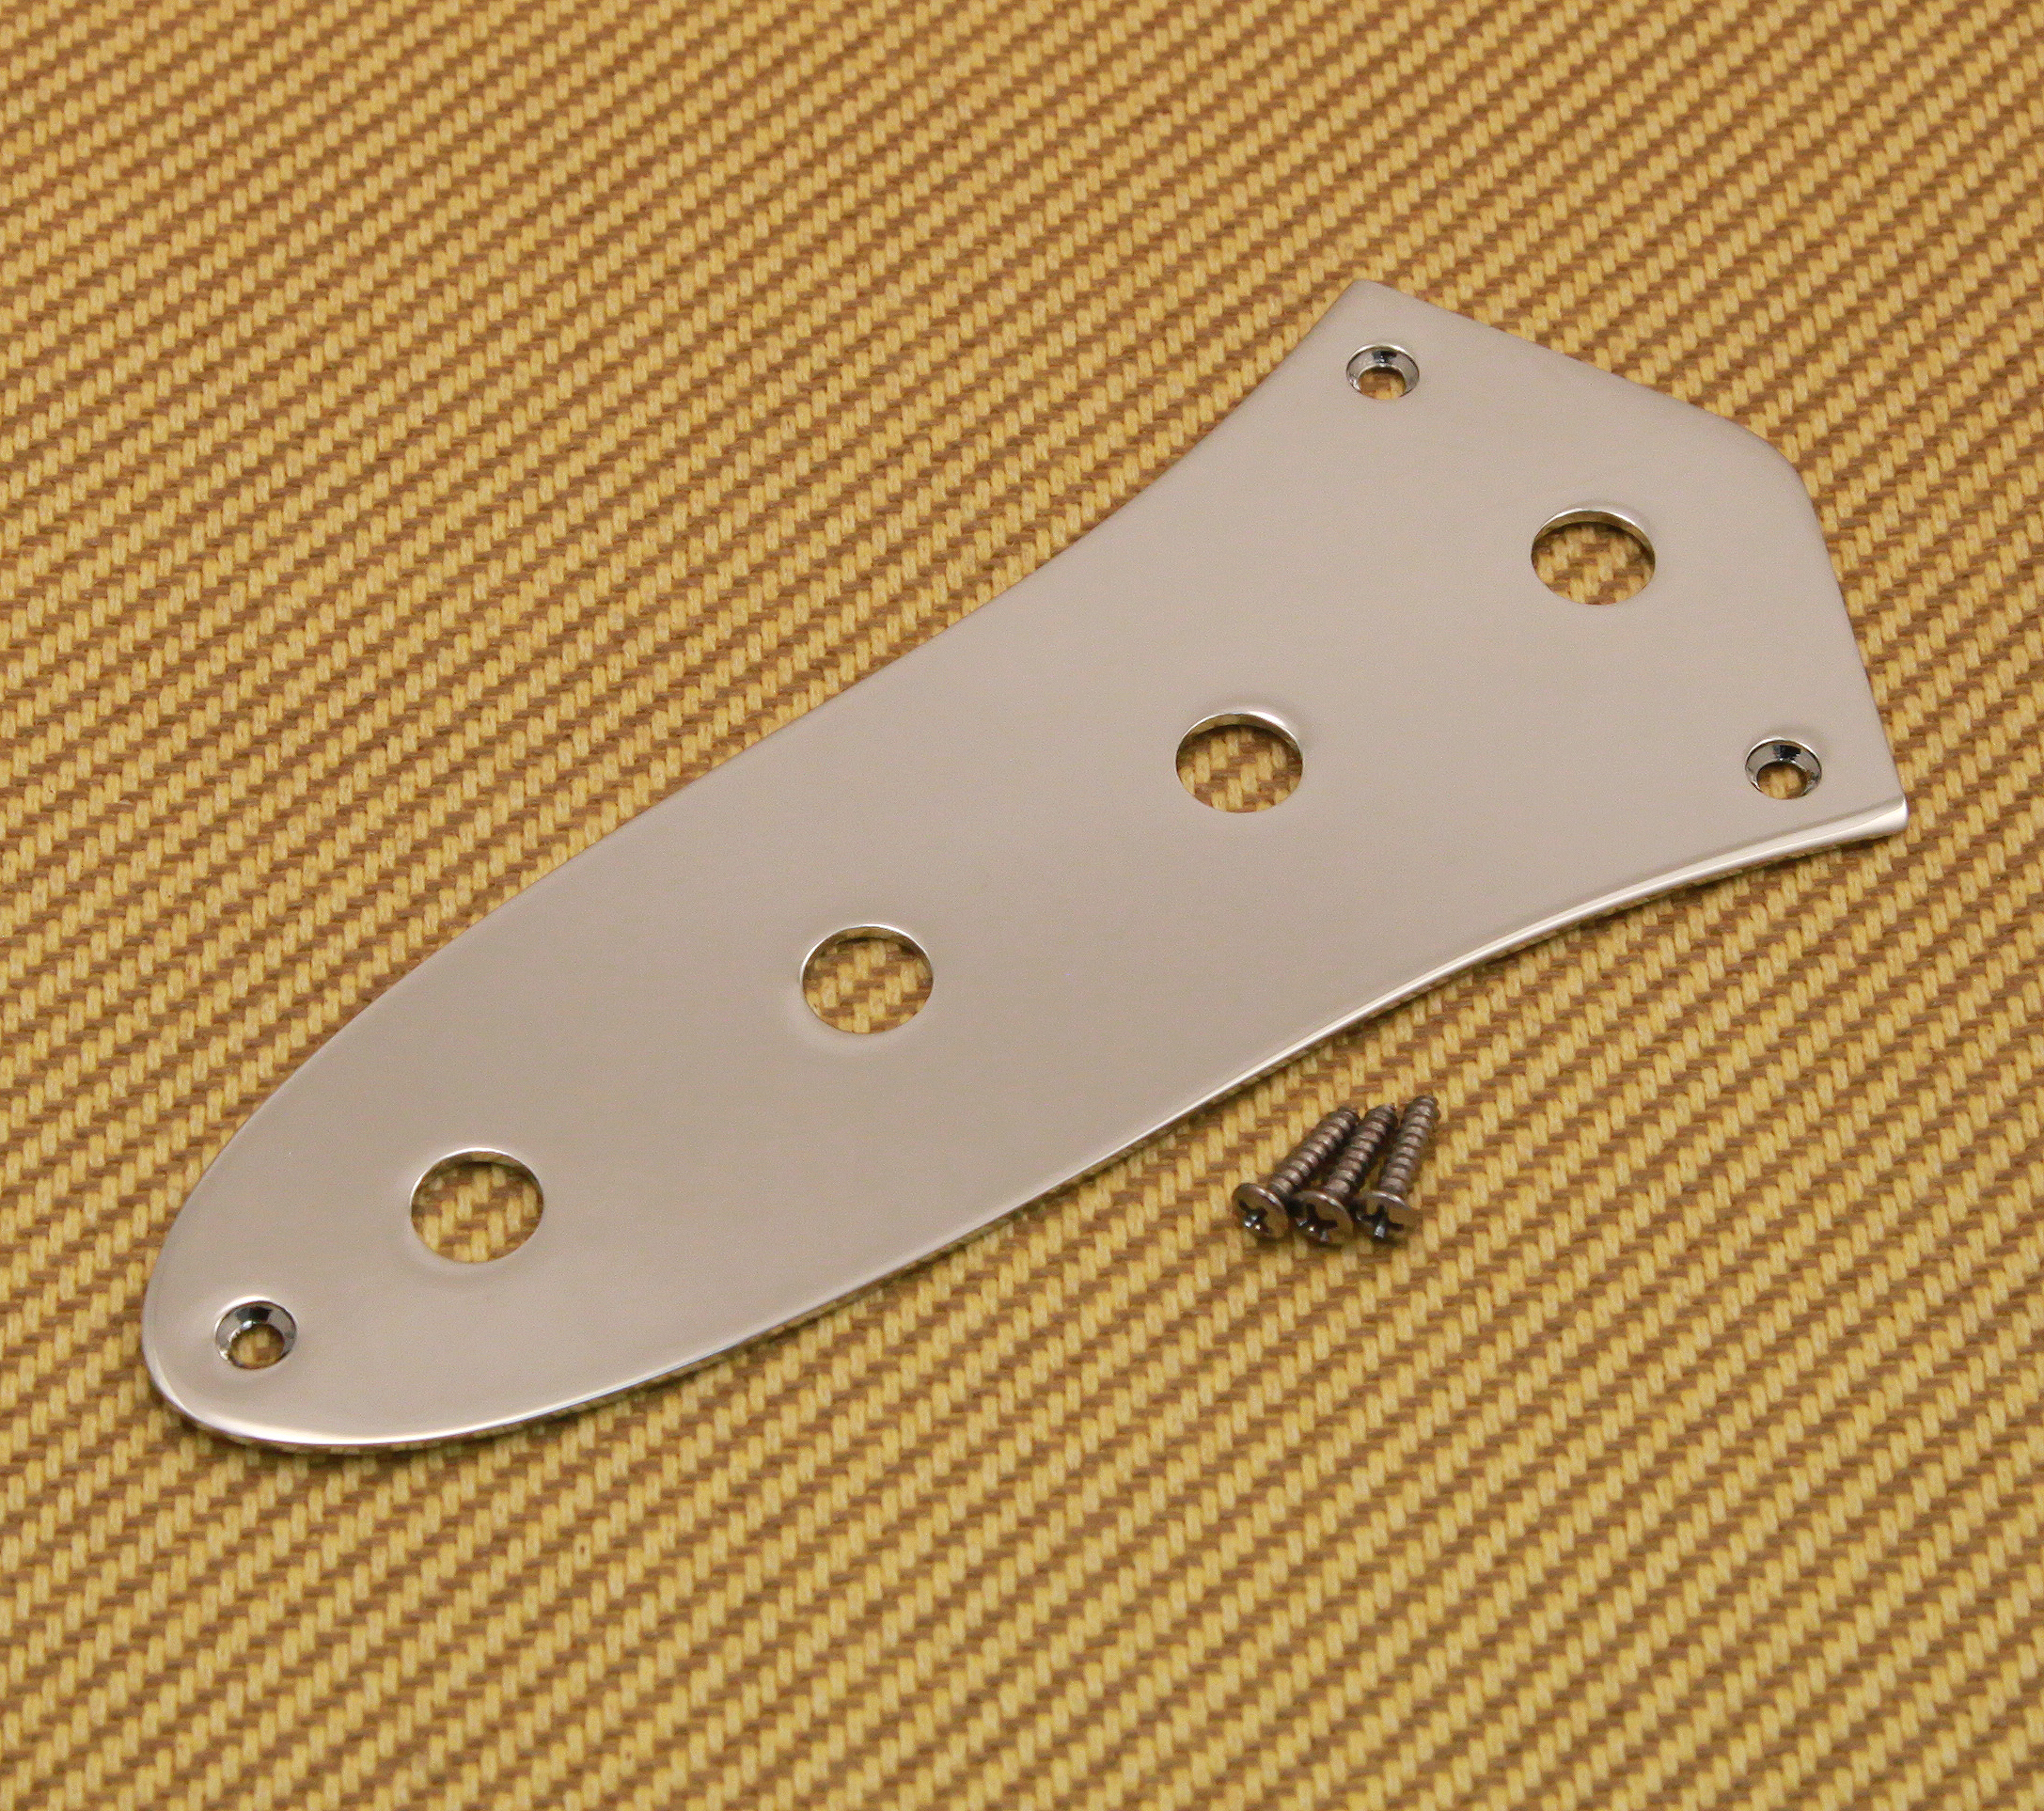 4-Hole Control Plate,Vintage Style Metal Control Plate Replacement Part for Jazz Bass Guitars 2 Colors Brass 